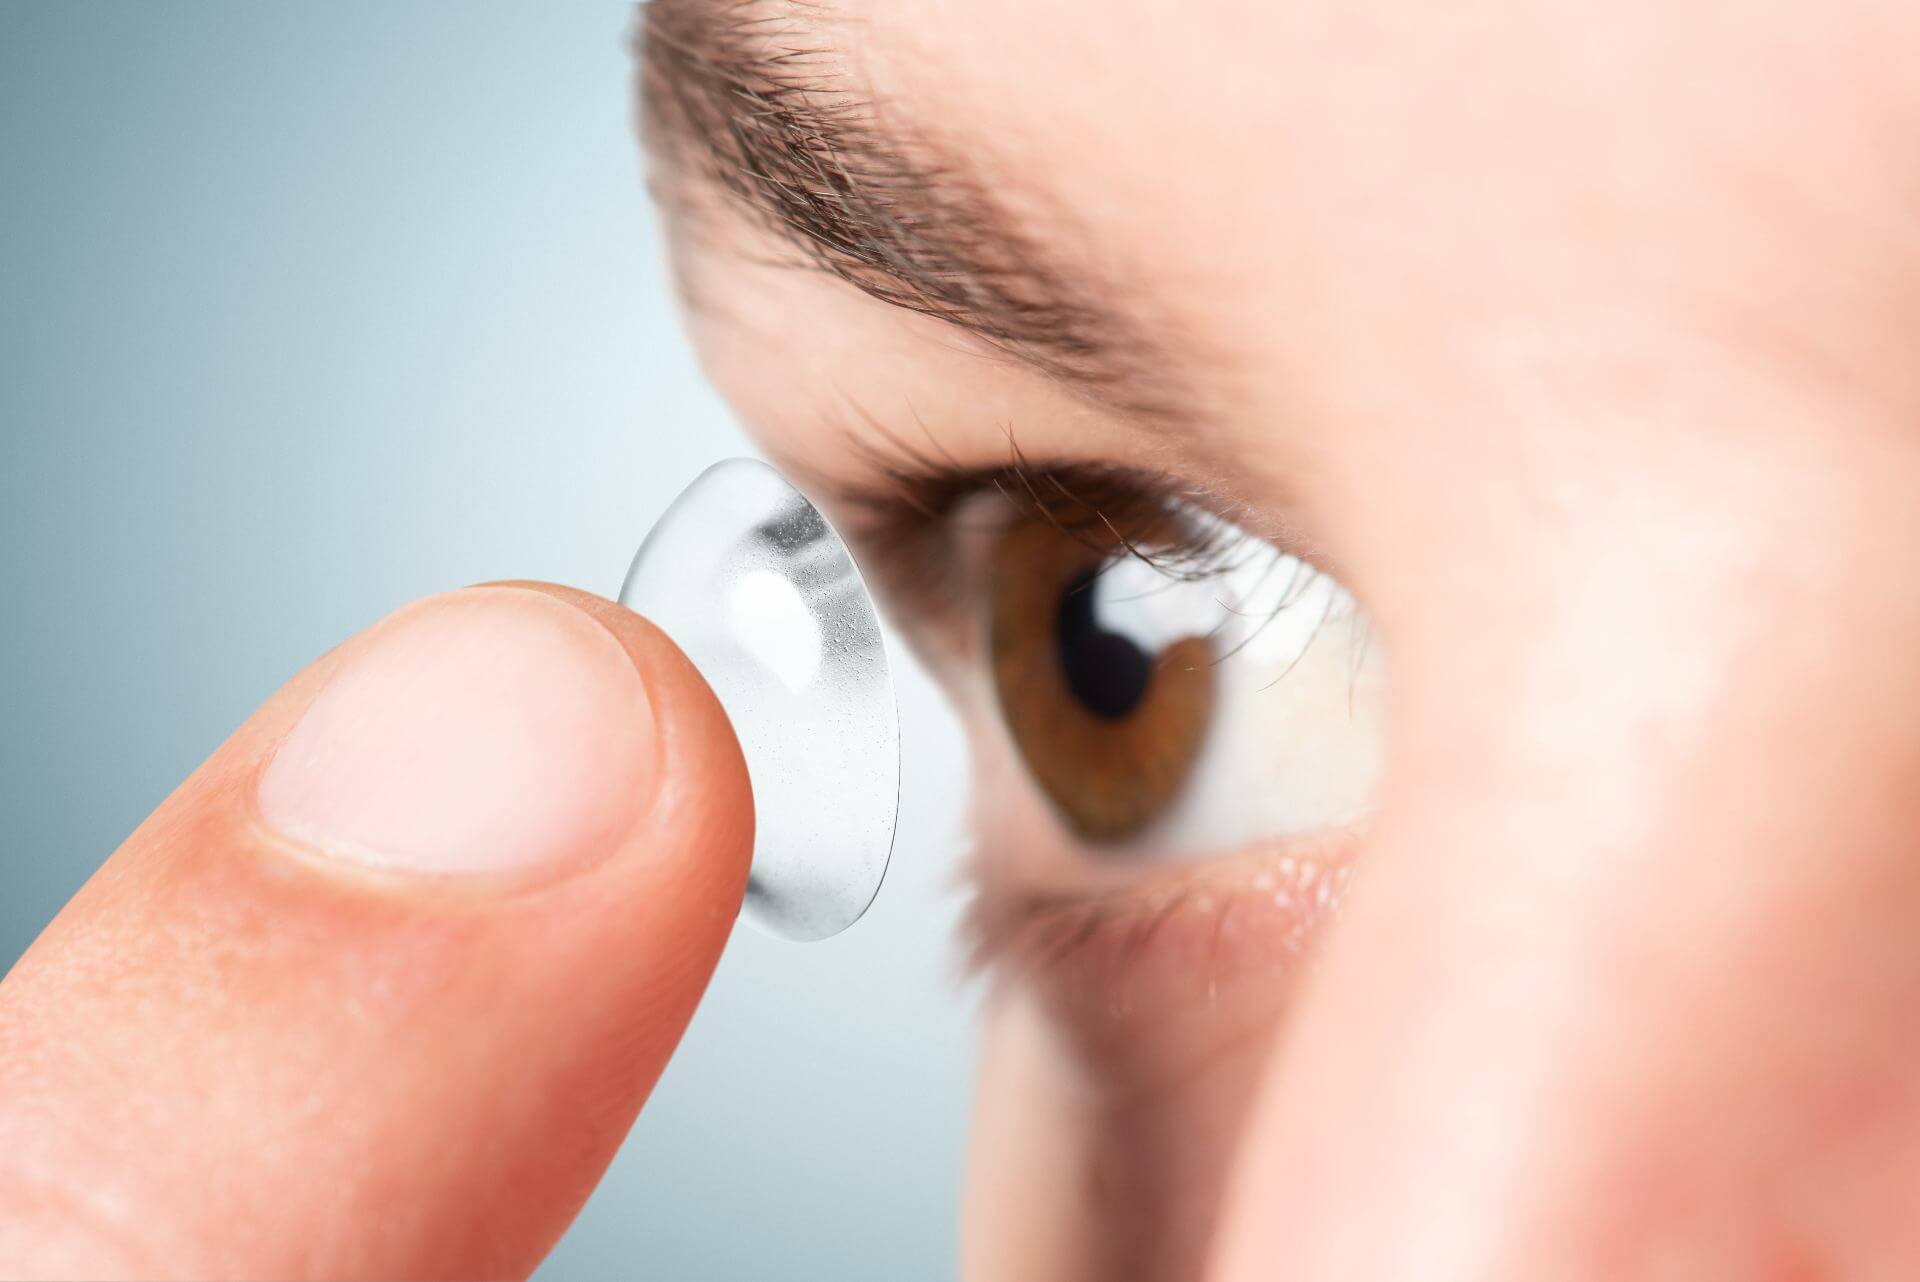 Things to Consider When Choosing Contact Lenses